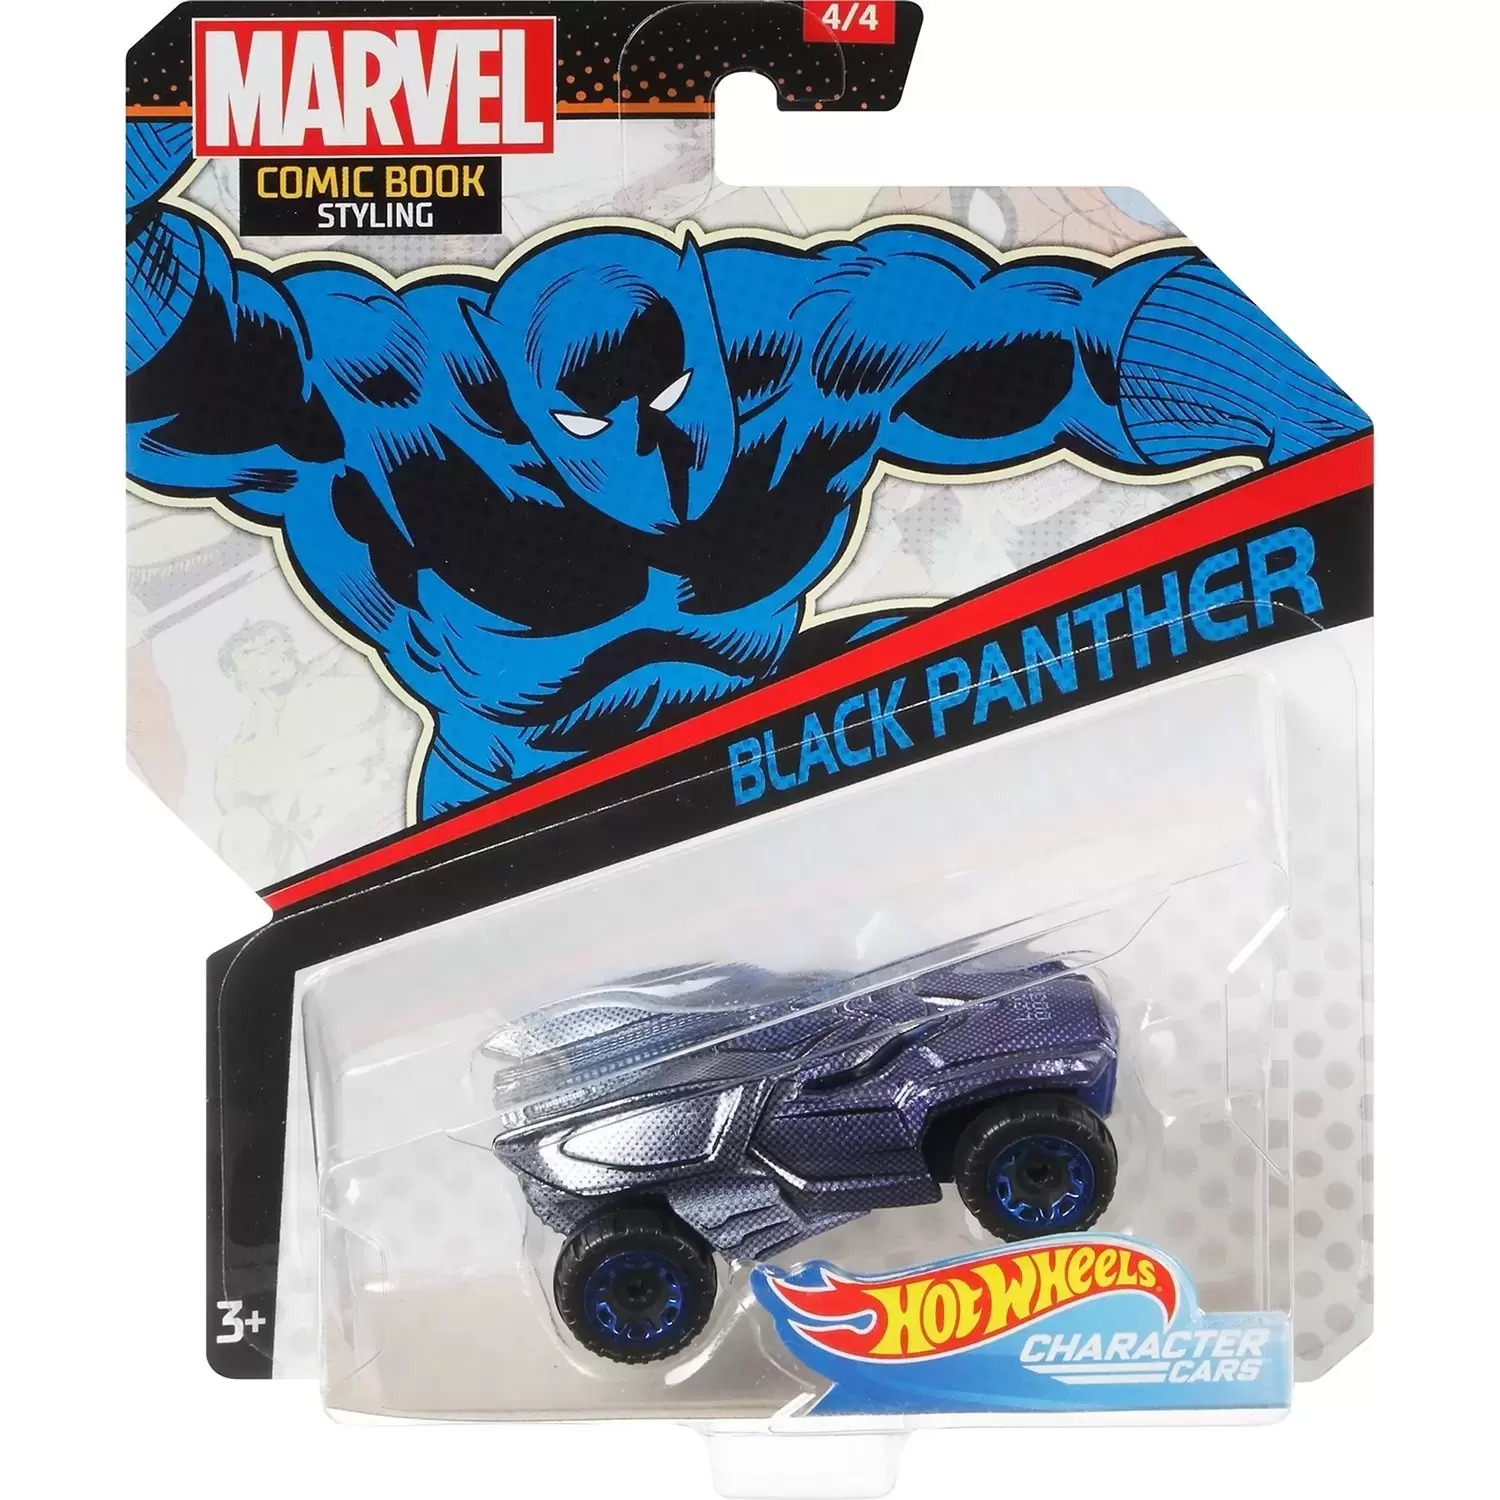 Marvel Character Cars - Comic Book Styling - Black Panther